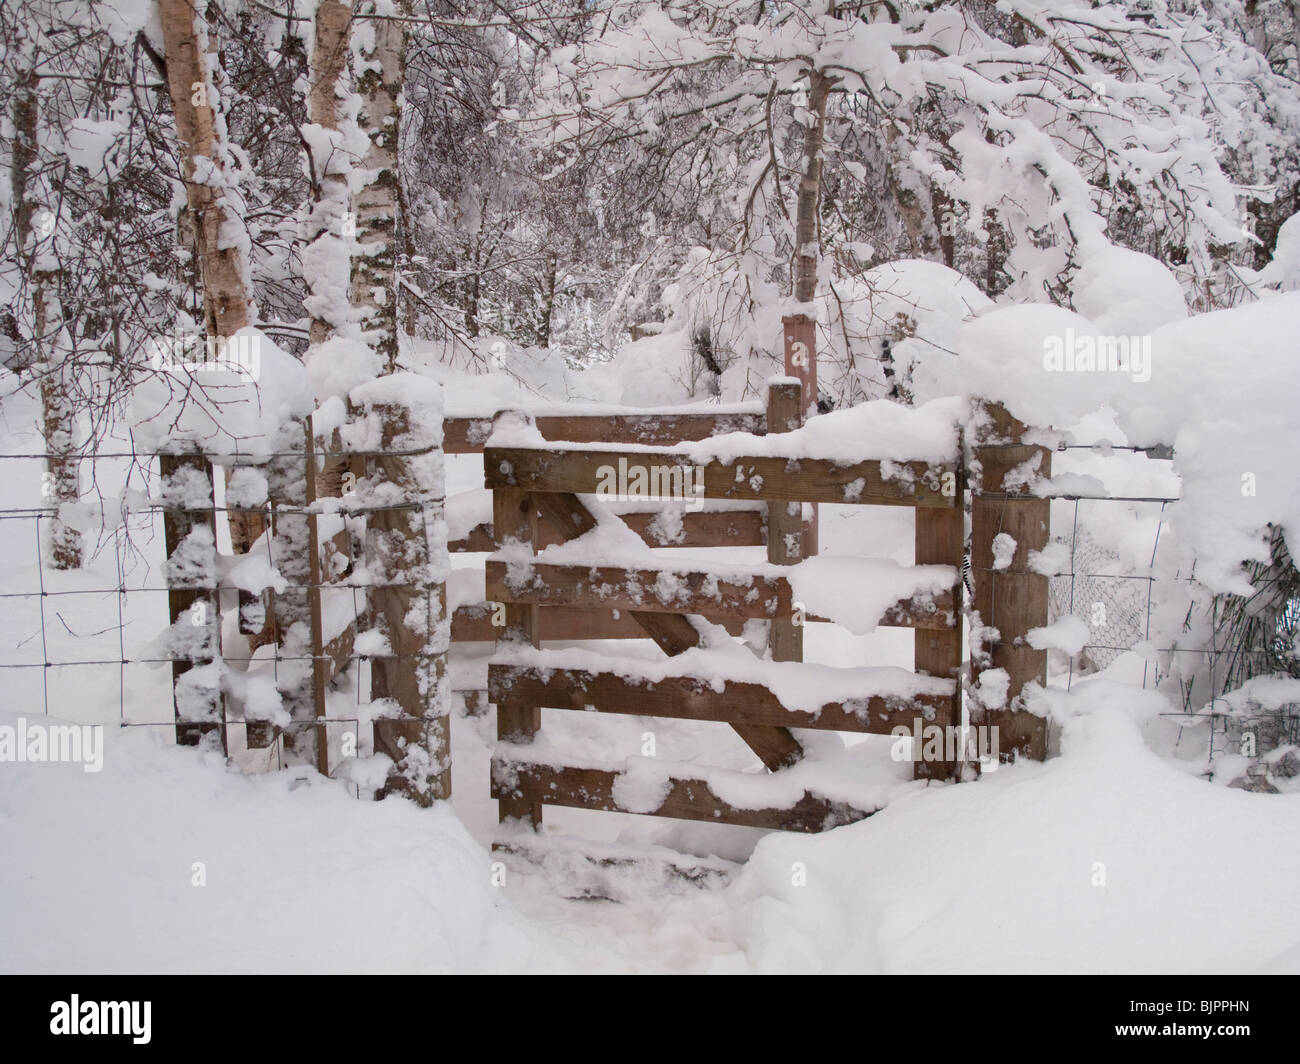 Wooden side pass gate in heavy snow Stock Photo